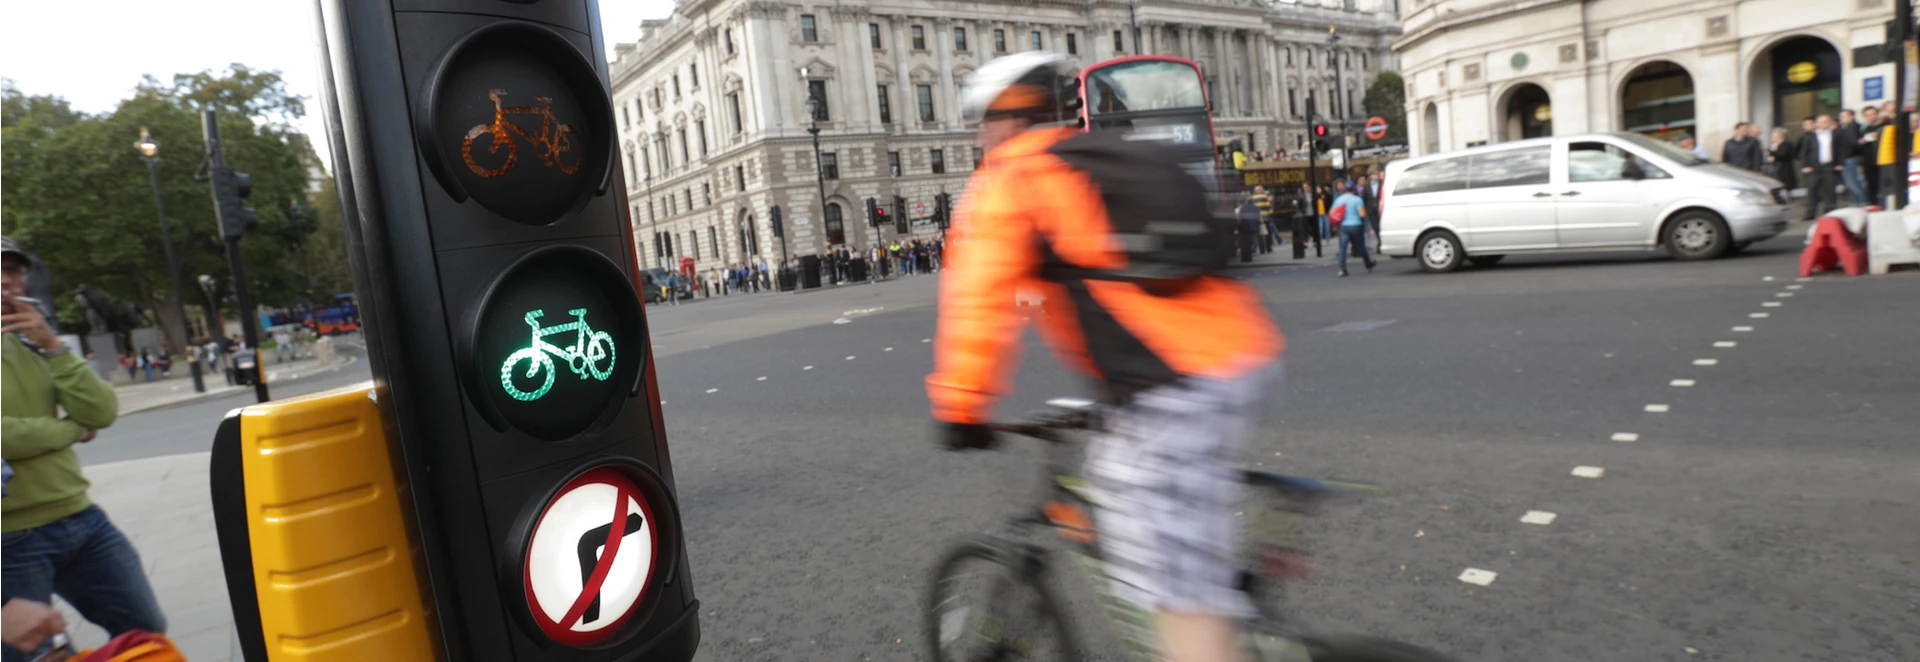 New driving law sees £100 fine for driving near cyclists